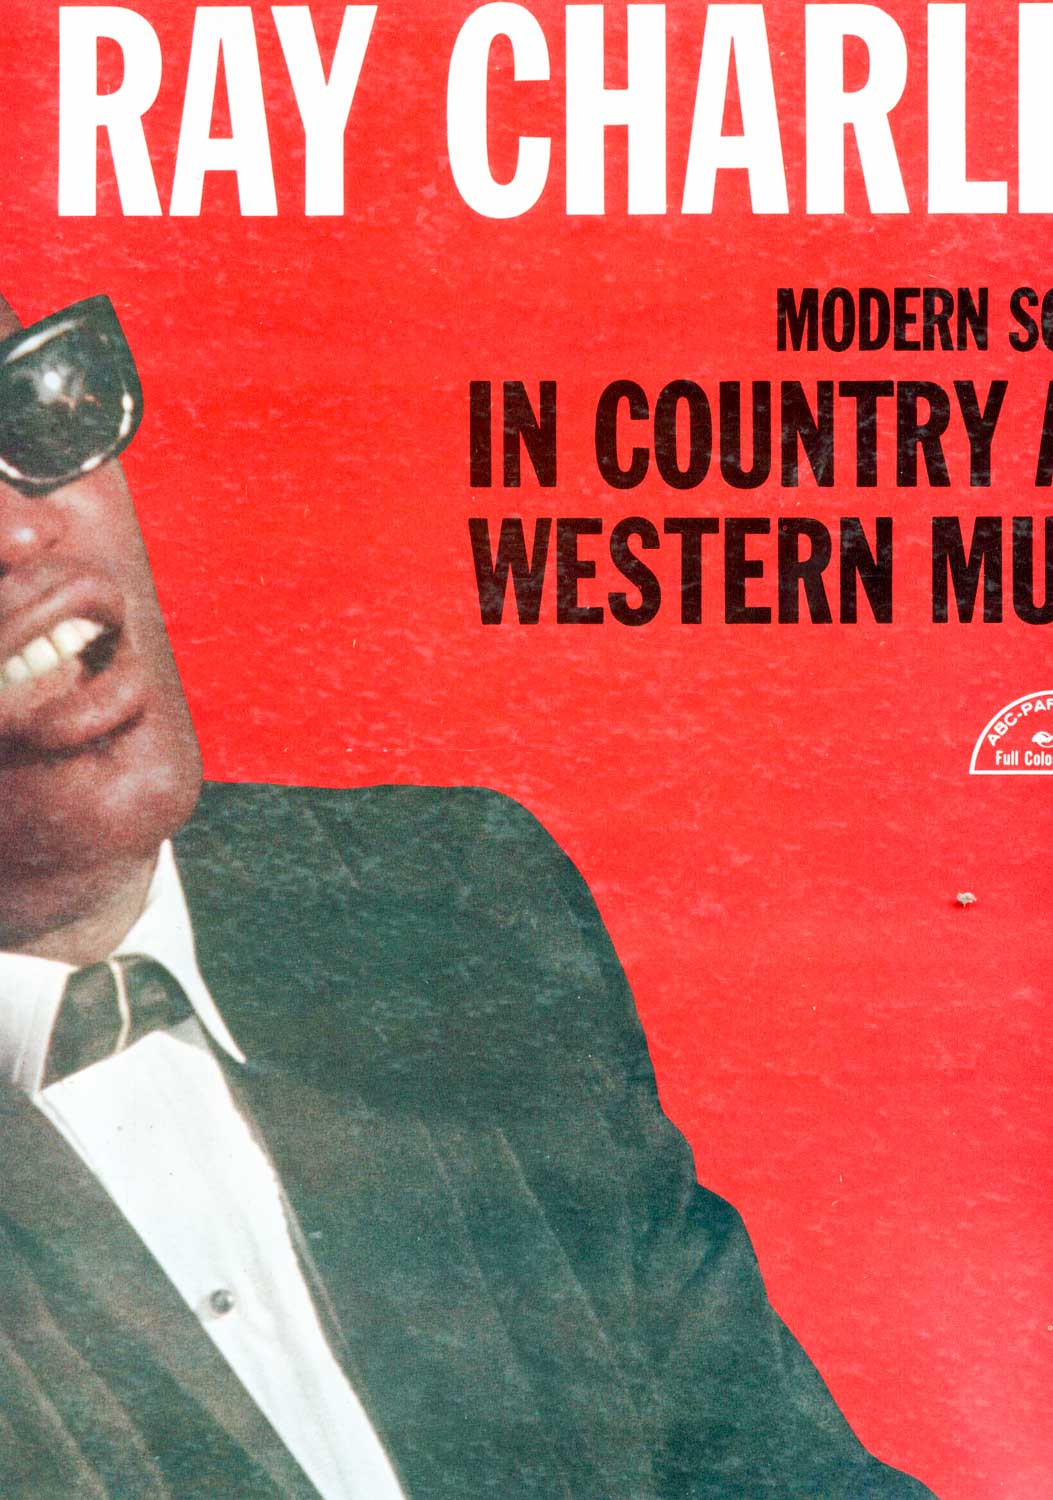 Ray Charles  Modern Sounds in Country and Western Music (ABC-410)  *LP 12'' (Vinyl)*. 